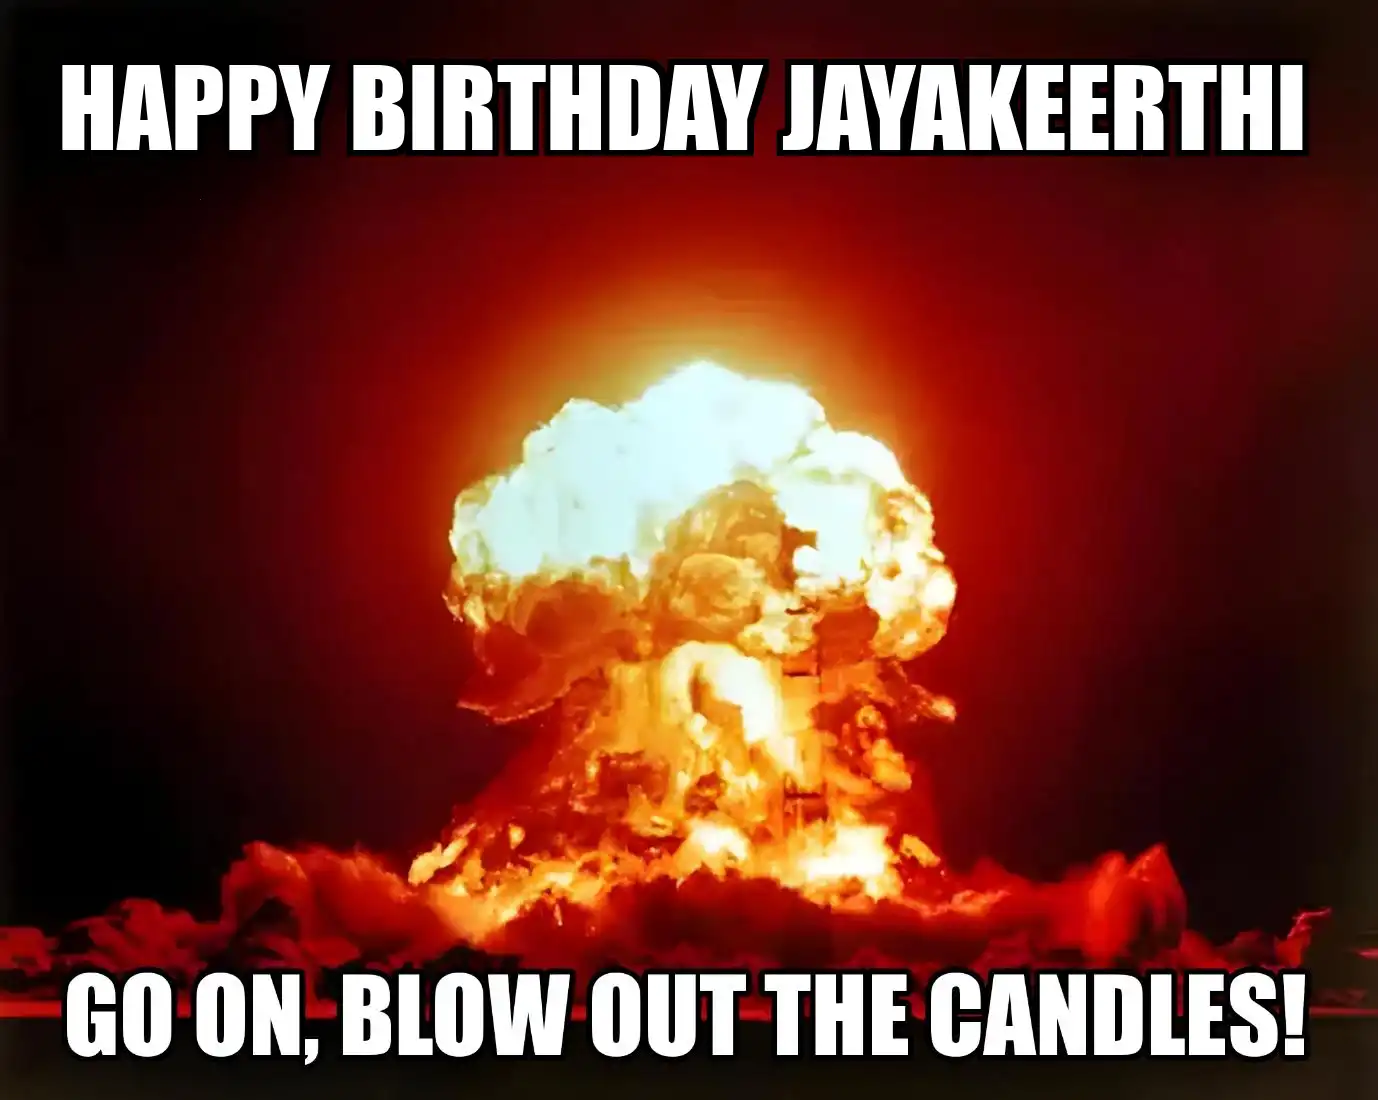 Happy Birthday Jayakeerthi Go On Blow Out The Candles Meme